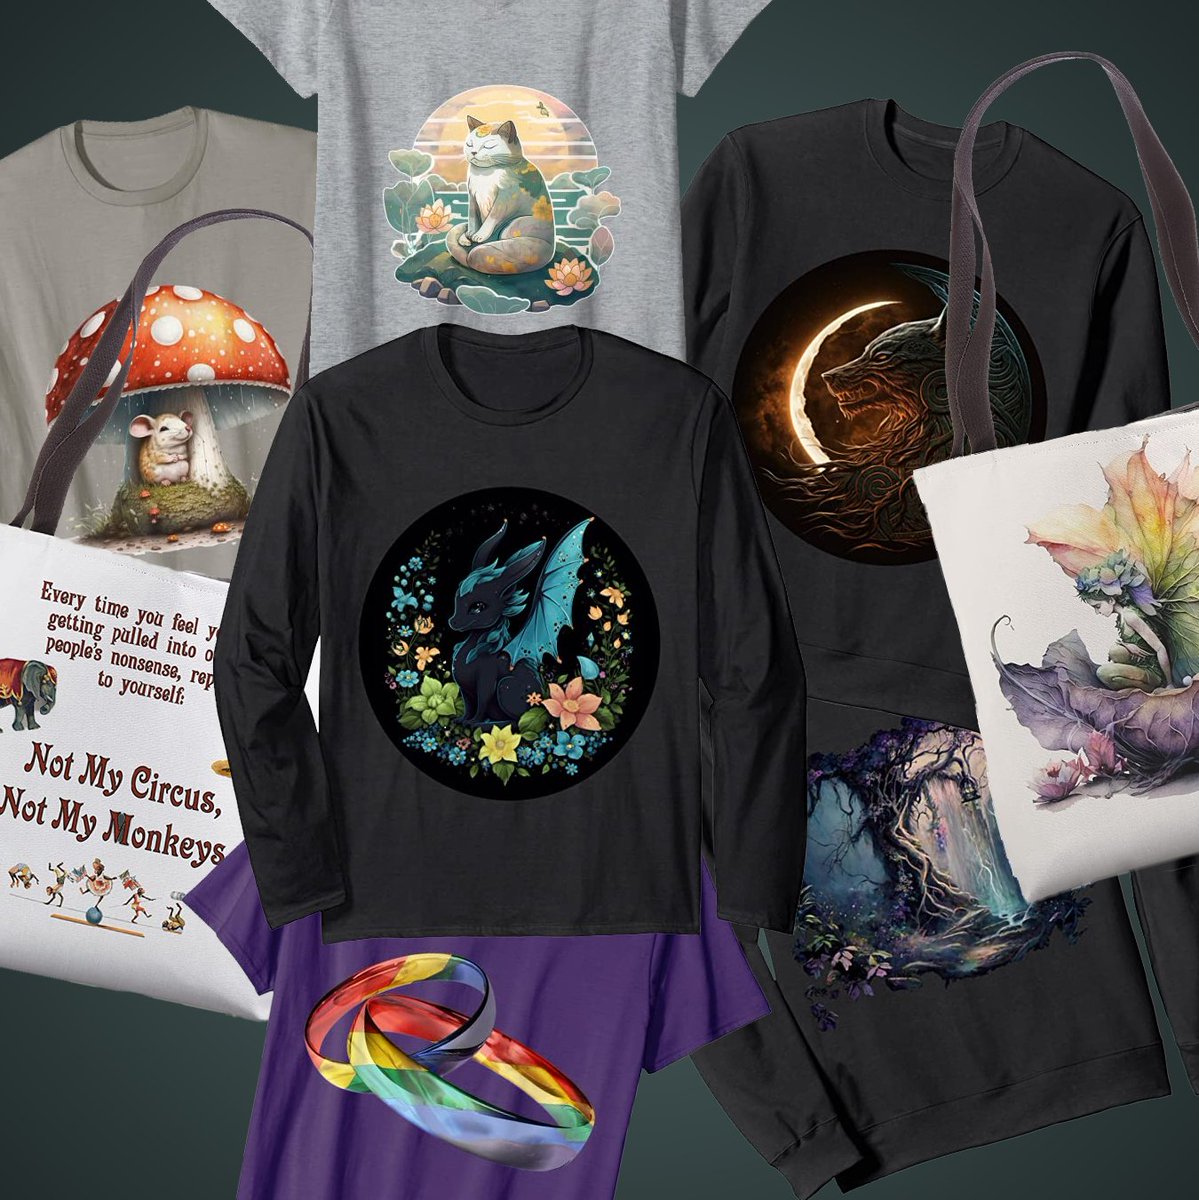 Do you love supporting independent artists and getting awesome products at the same time? Then you’ll love my #AmazonMerch store! I have a variety of unique designs on shirts, tote bags, and more. Click now and #TreatYourself! amzn.to/40jPlD9  #SupportArtists #AmazonFinds